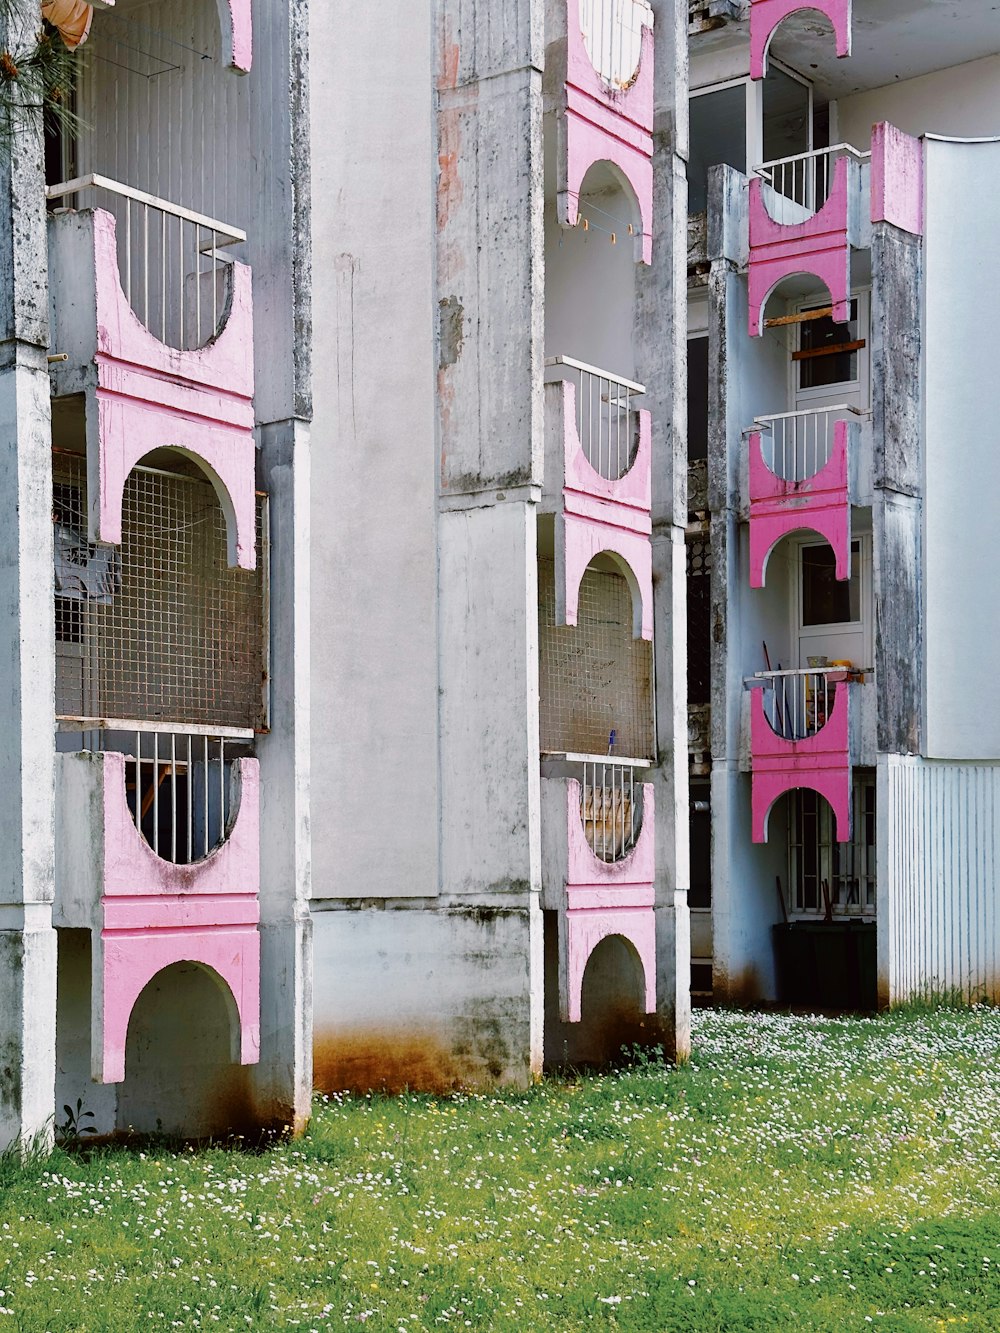 a row of pink and white buildings with balconies